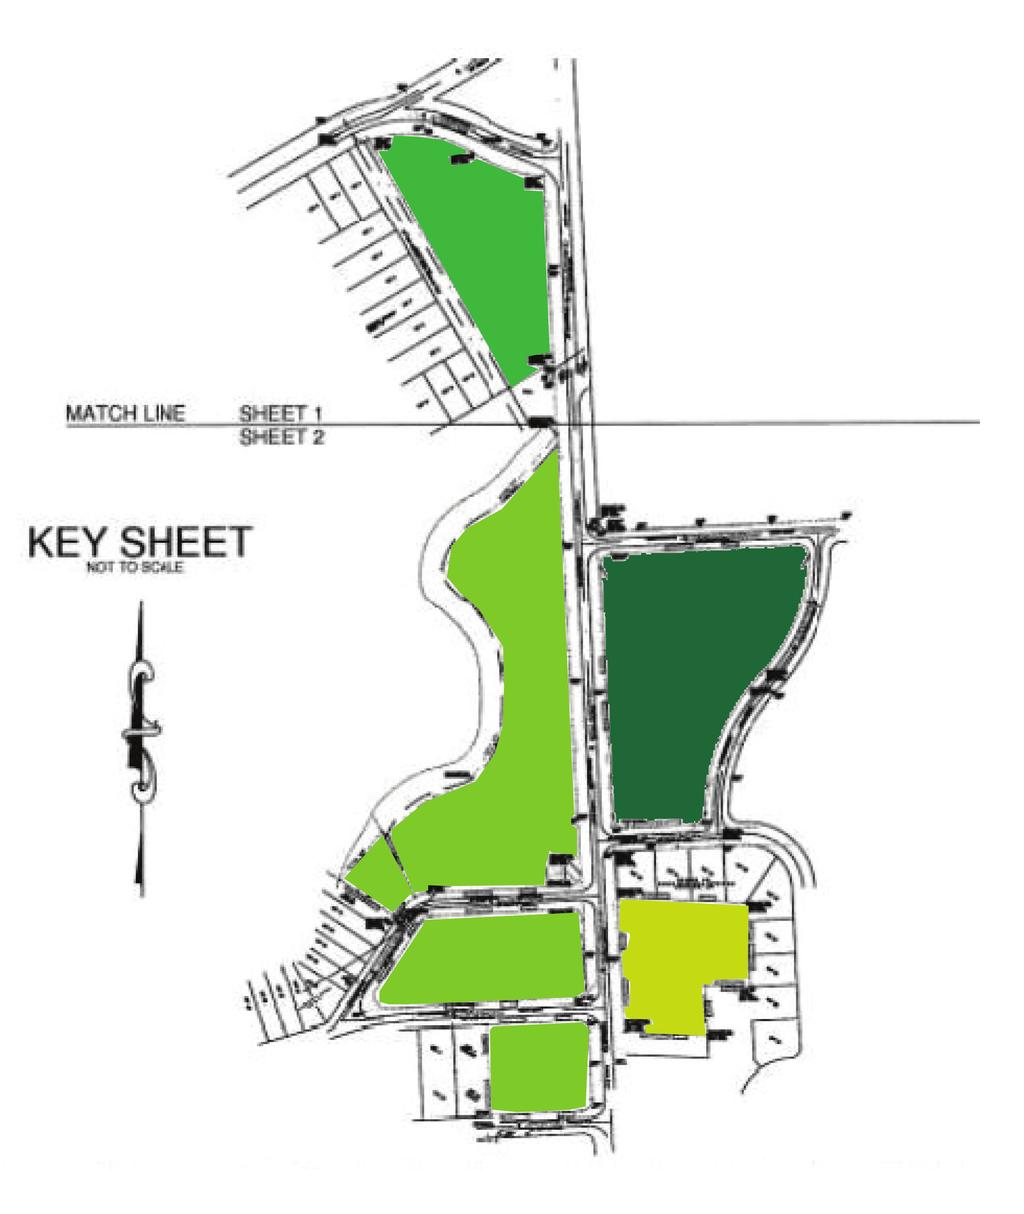 D HOTEL SITE CN ZONING HOTEL WITH APPROVALS D PARCEL SALE PRICE $1.075M KEY SHEET NOT TO SCALE LOT SIZE APN NUMBER 2.